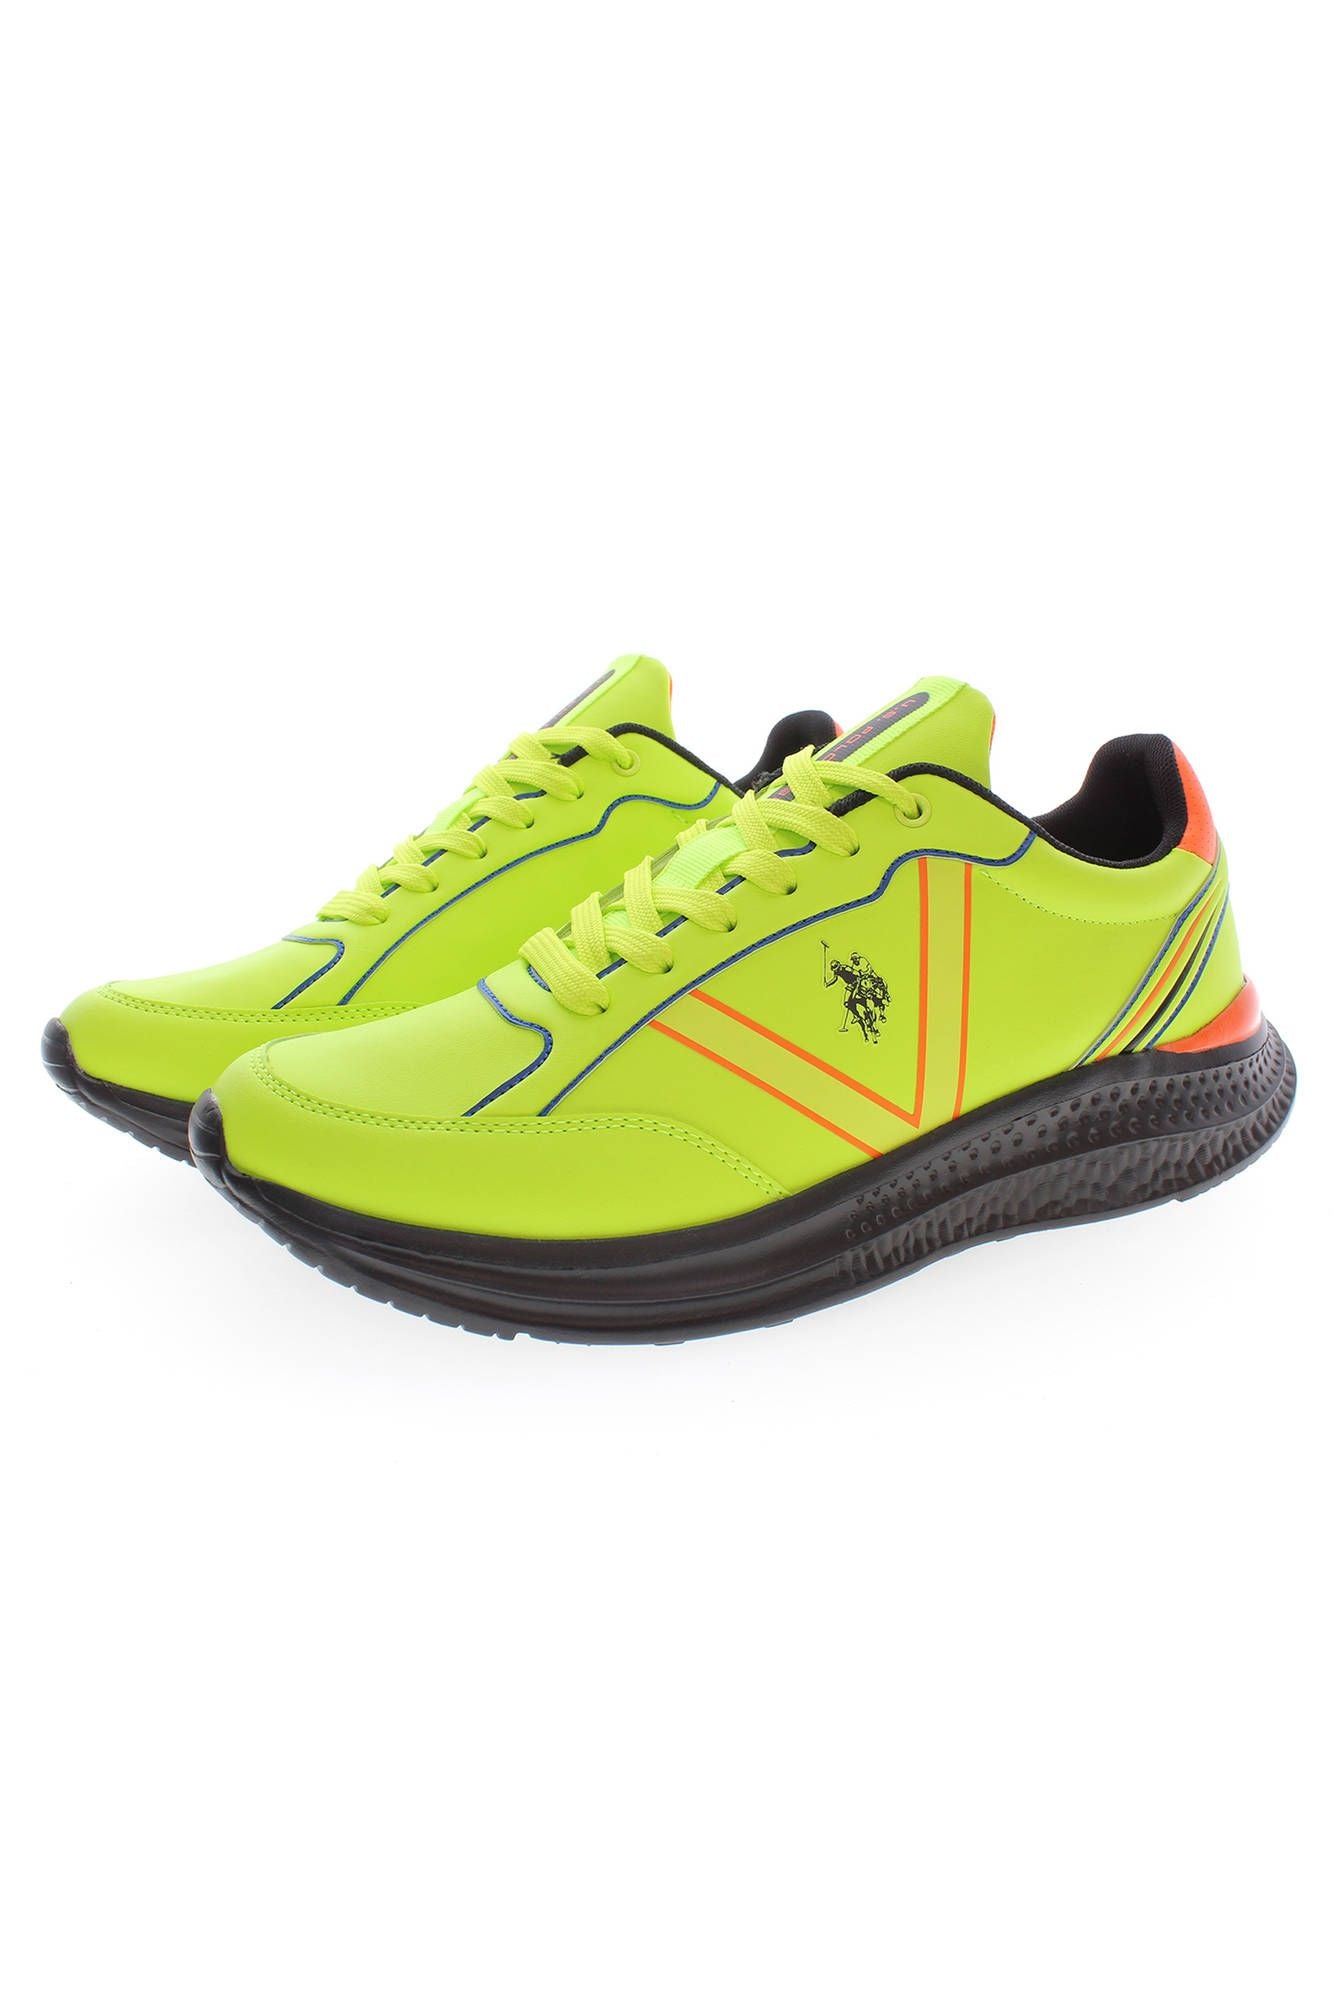 Sleek Yellow Sports Sneakers with Contrasting Details